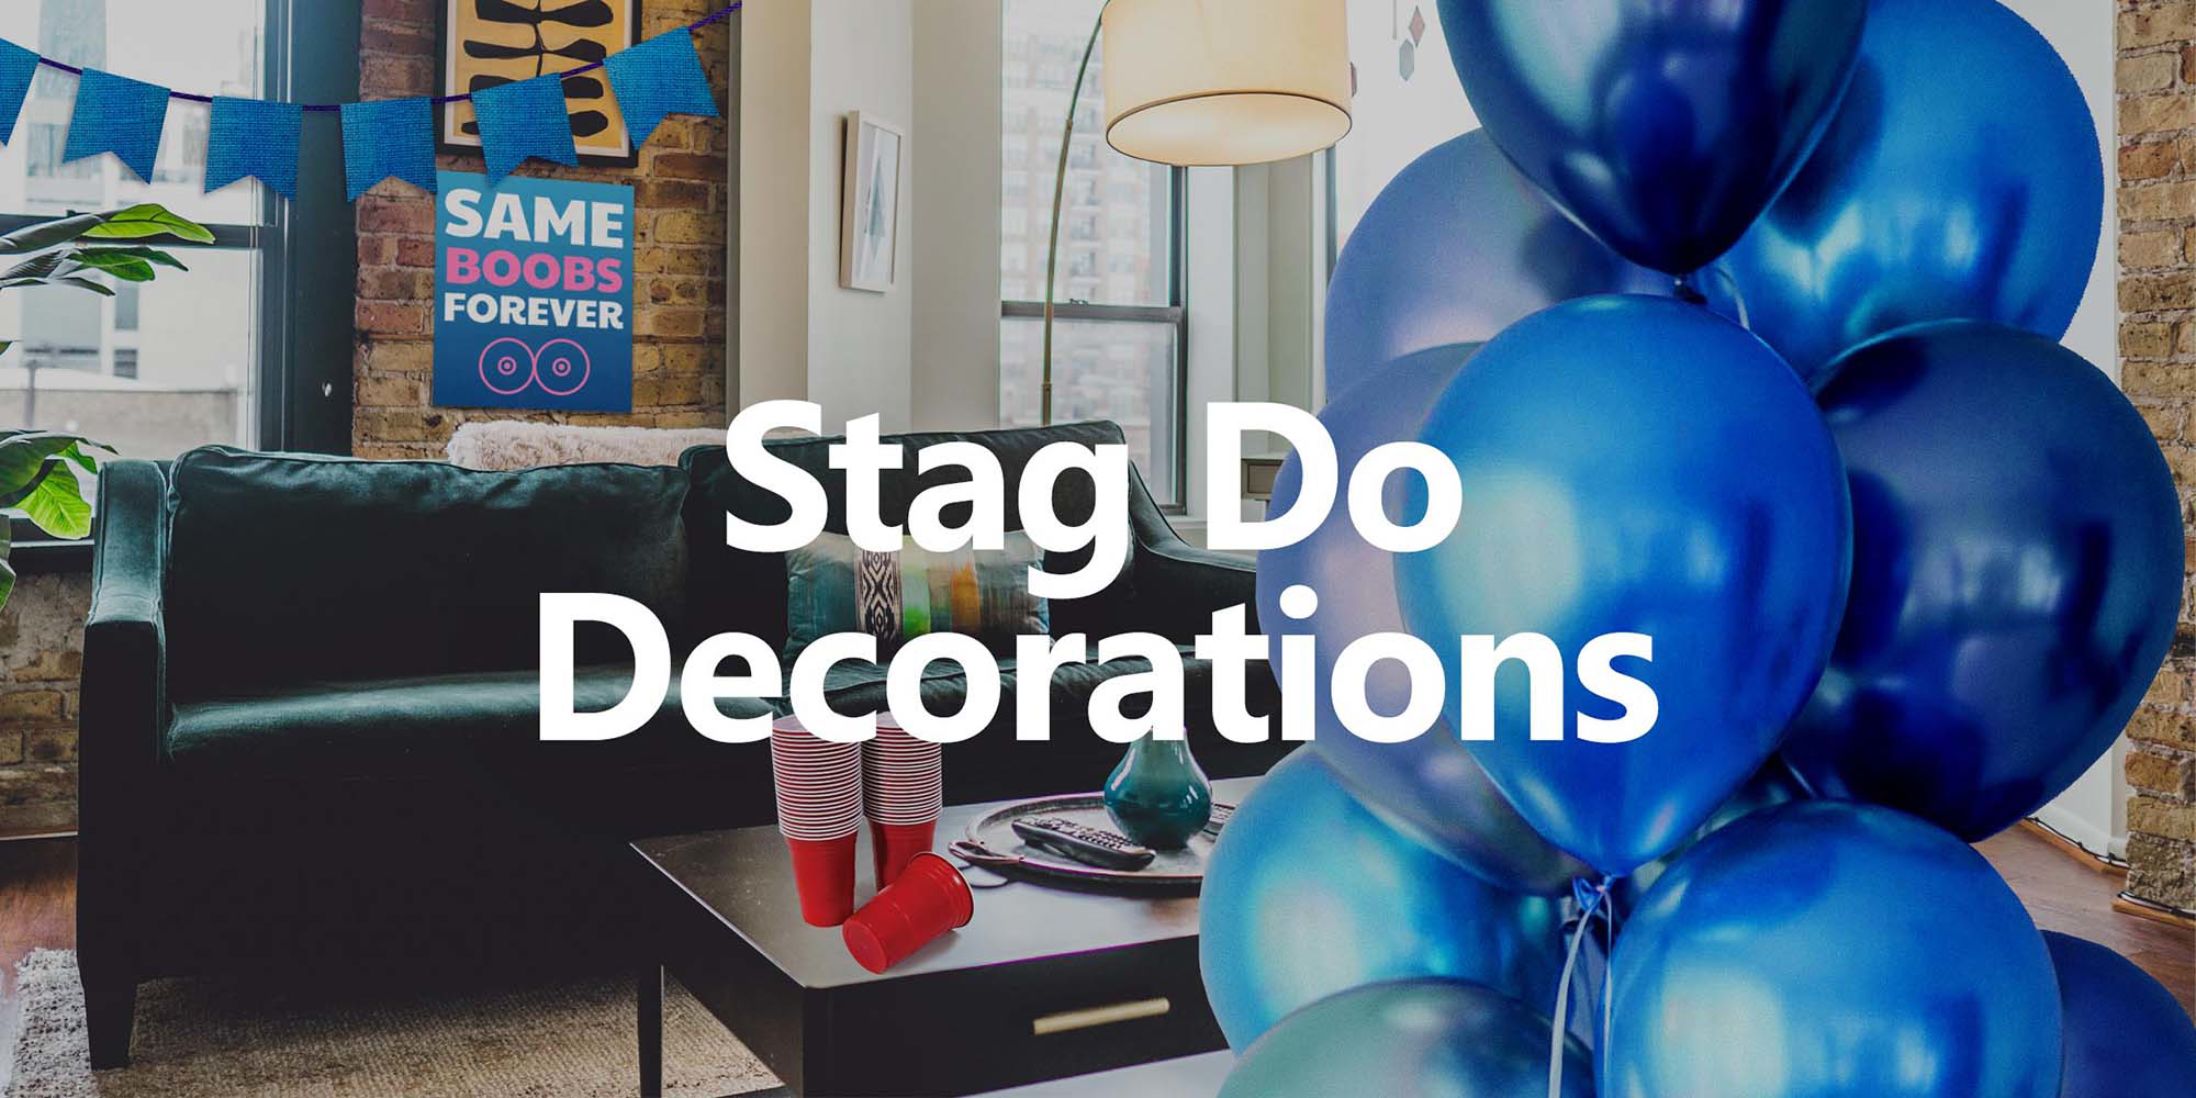 Decorations for Stag Parties